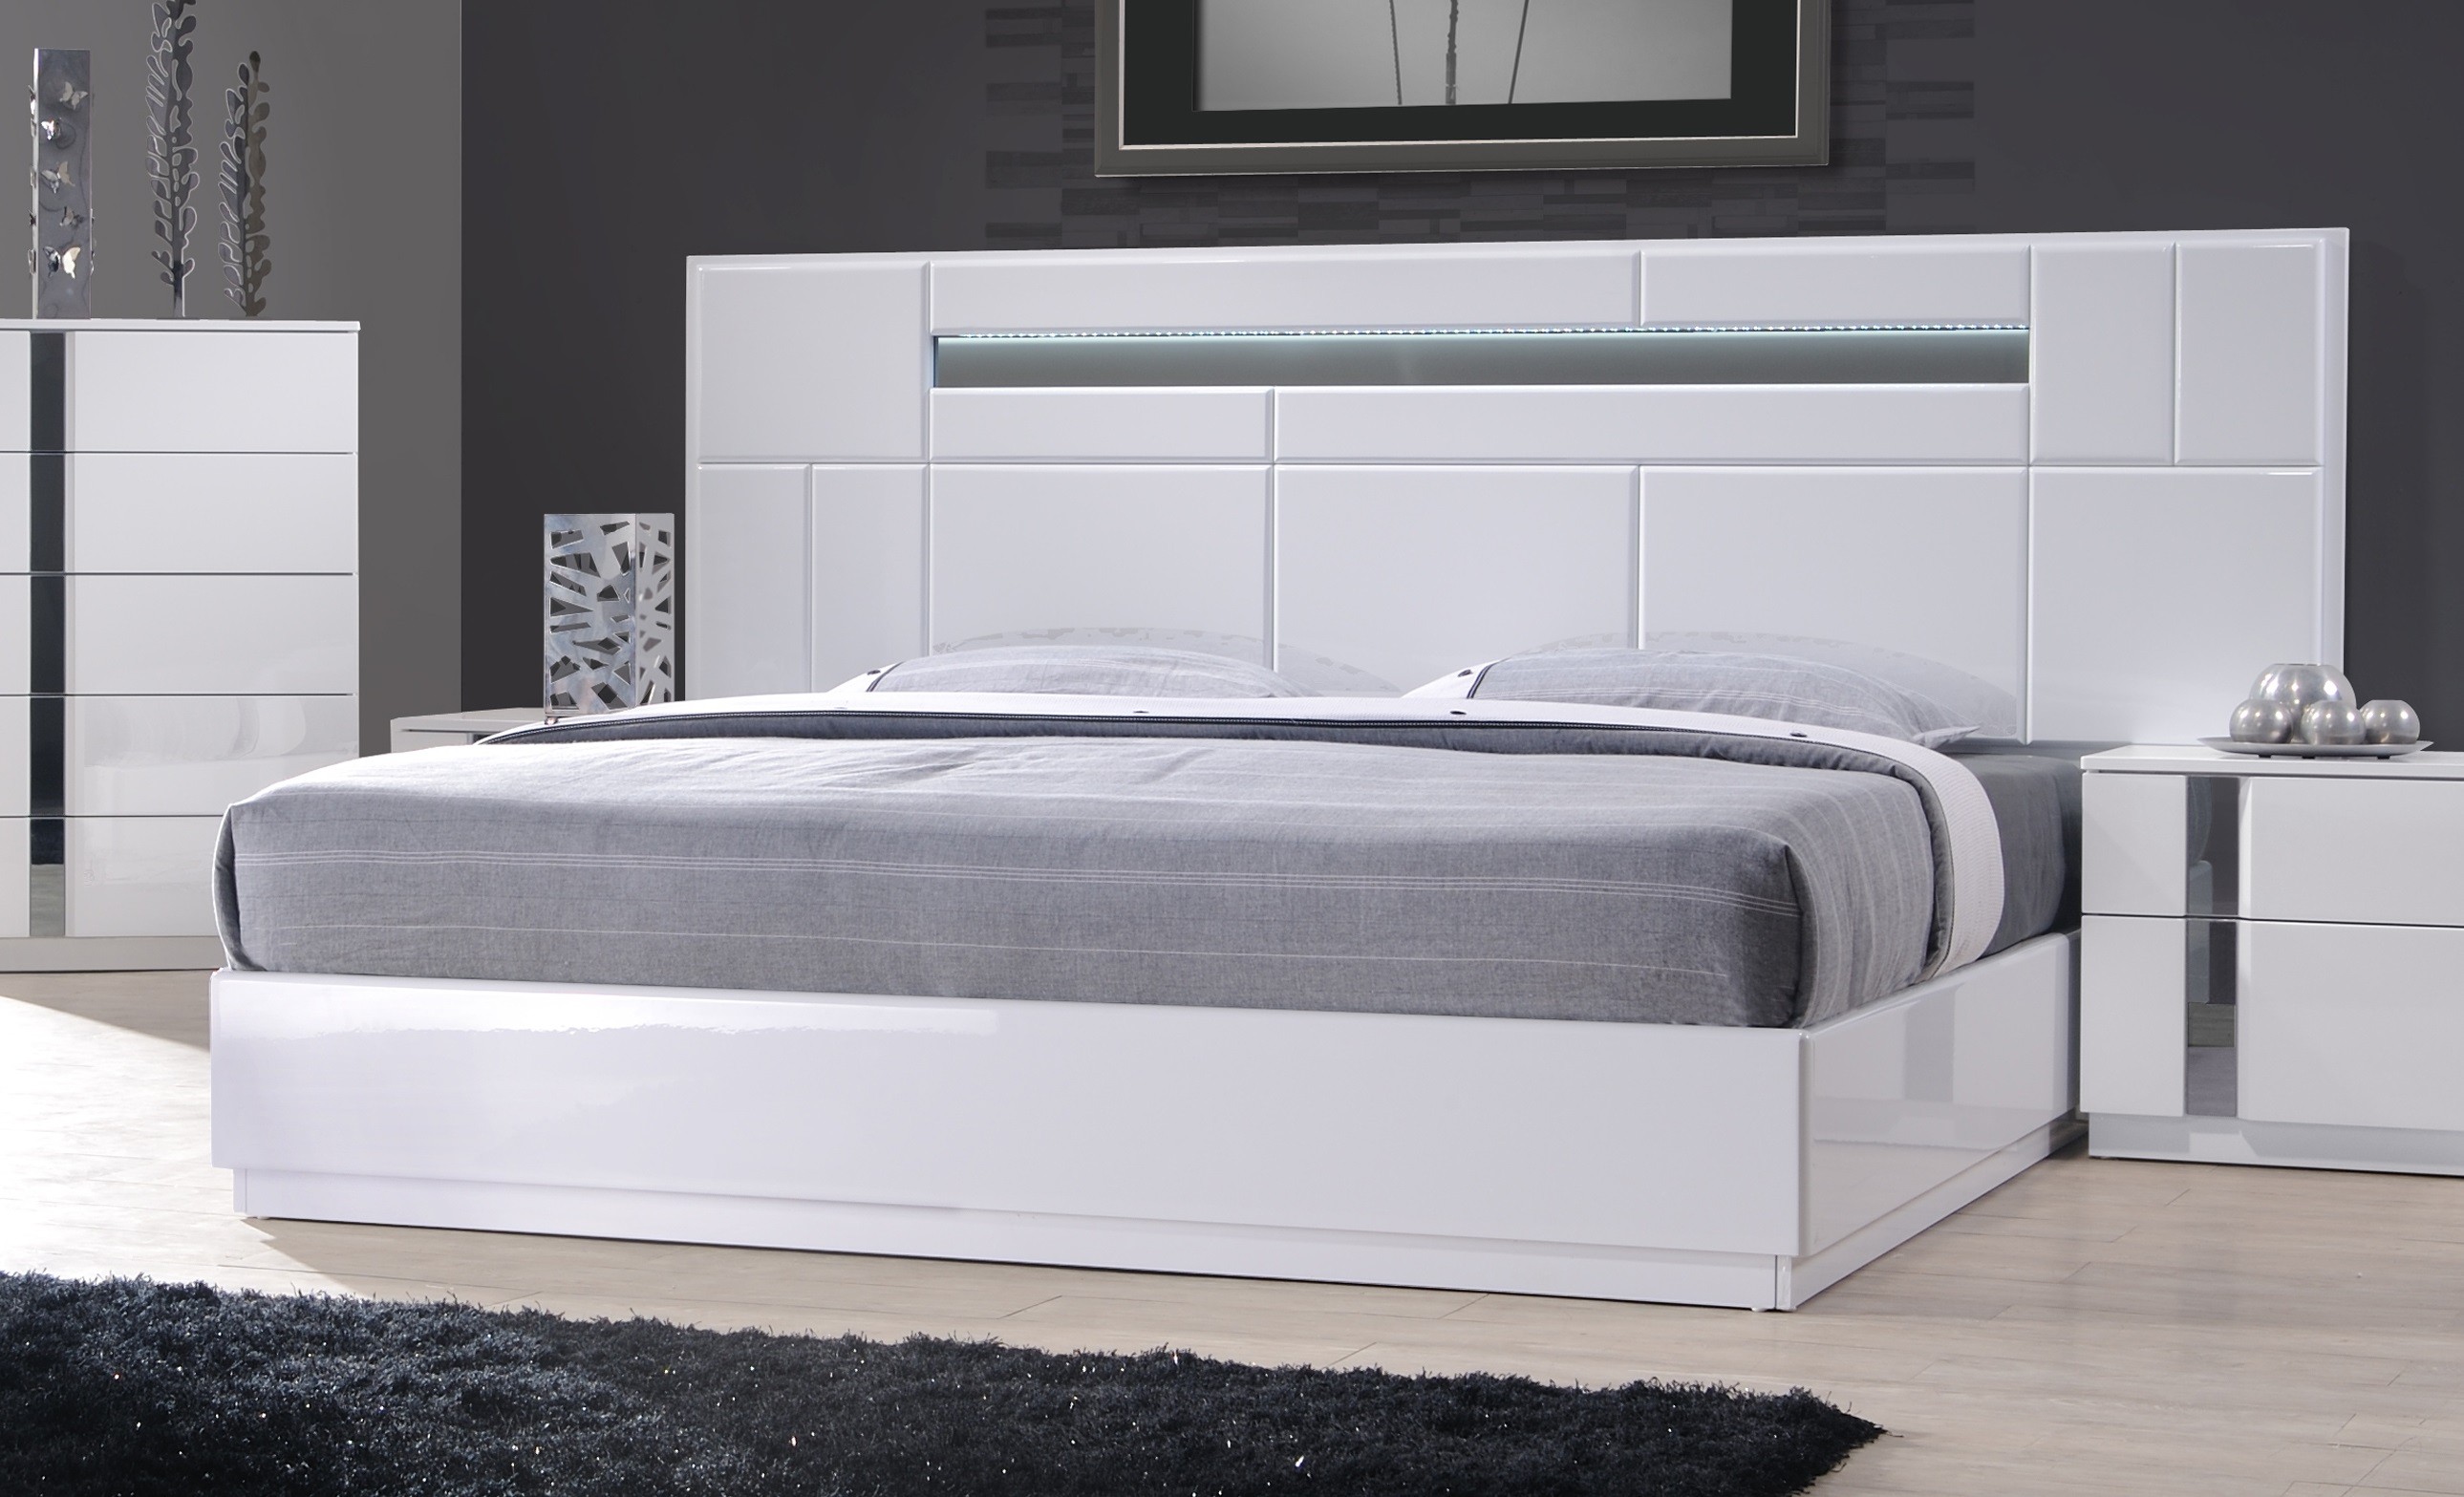 Broome King Bed